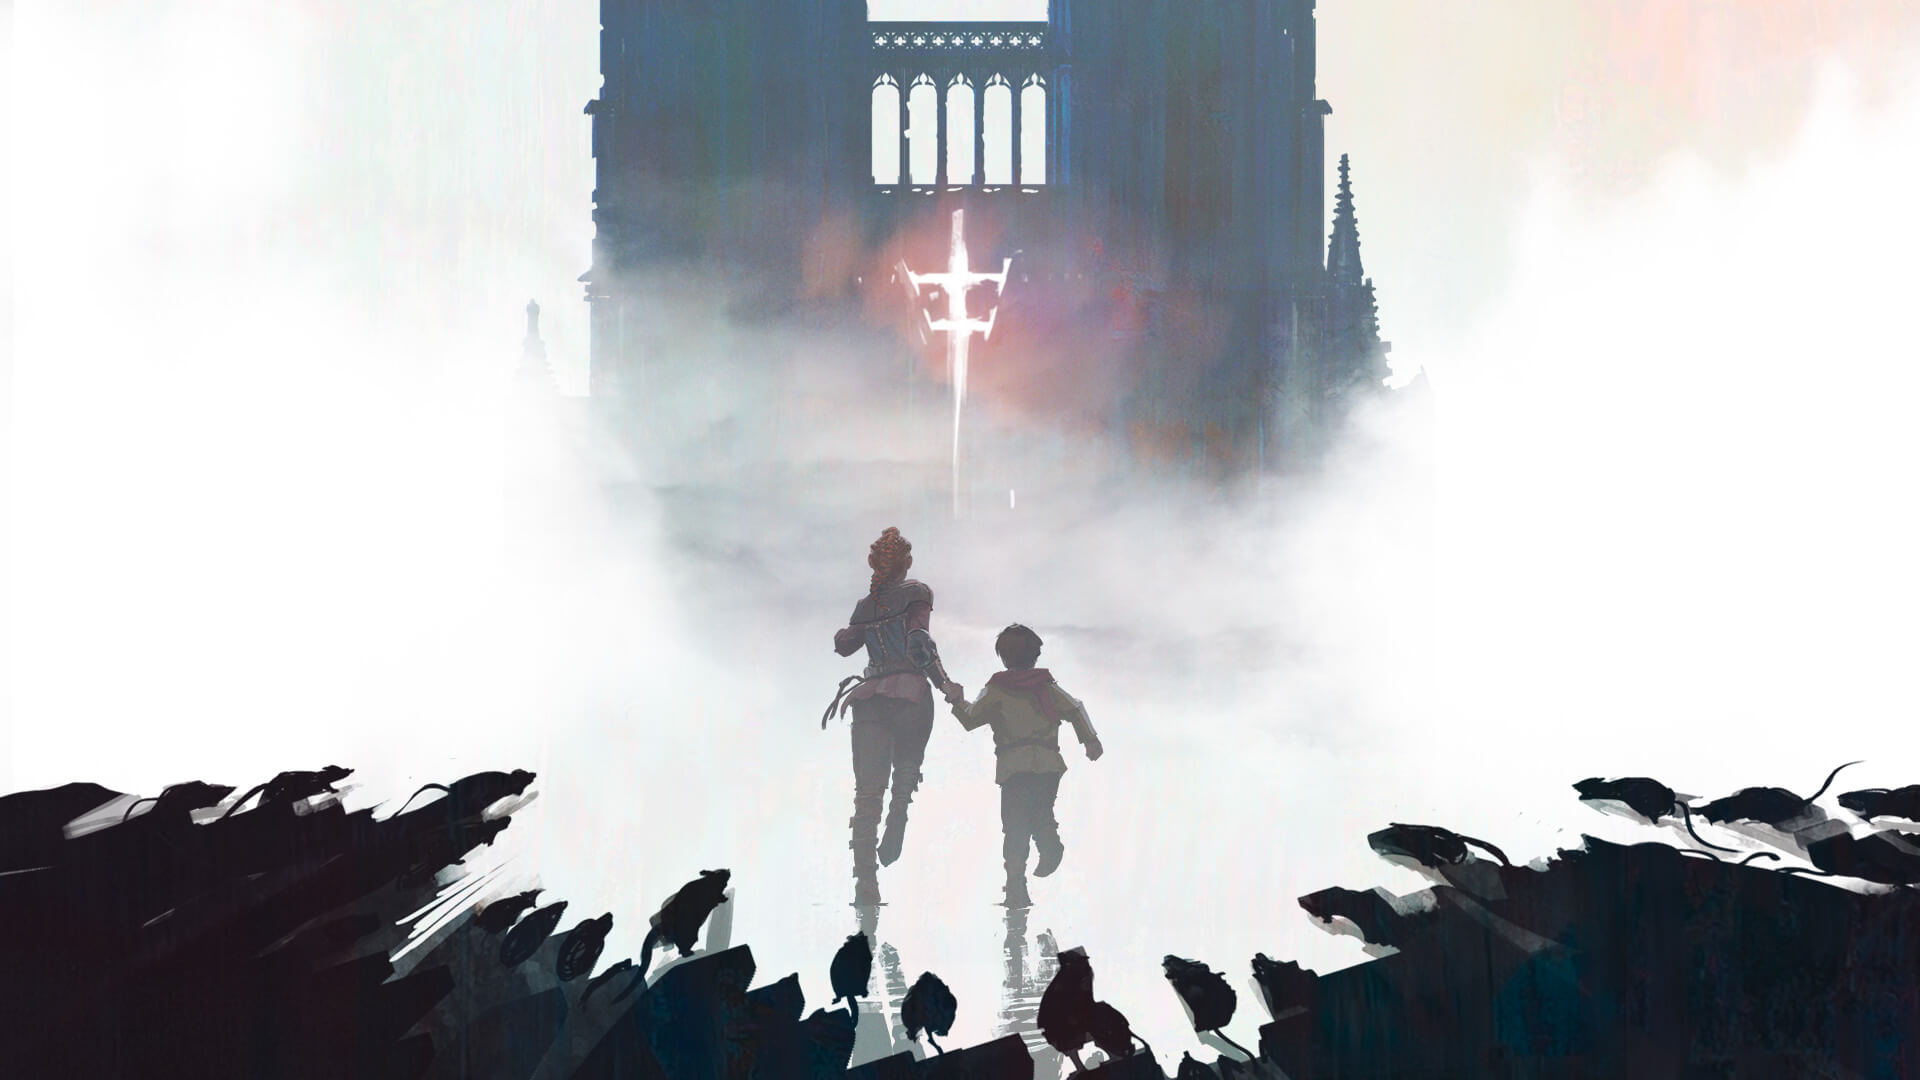 A Plague Tale: Requiem will take longer to beat than the original